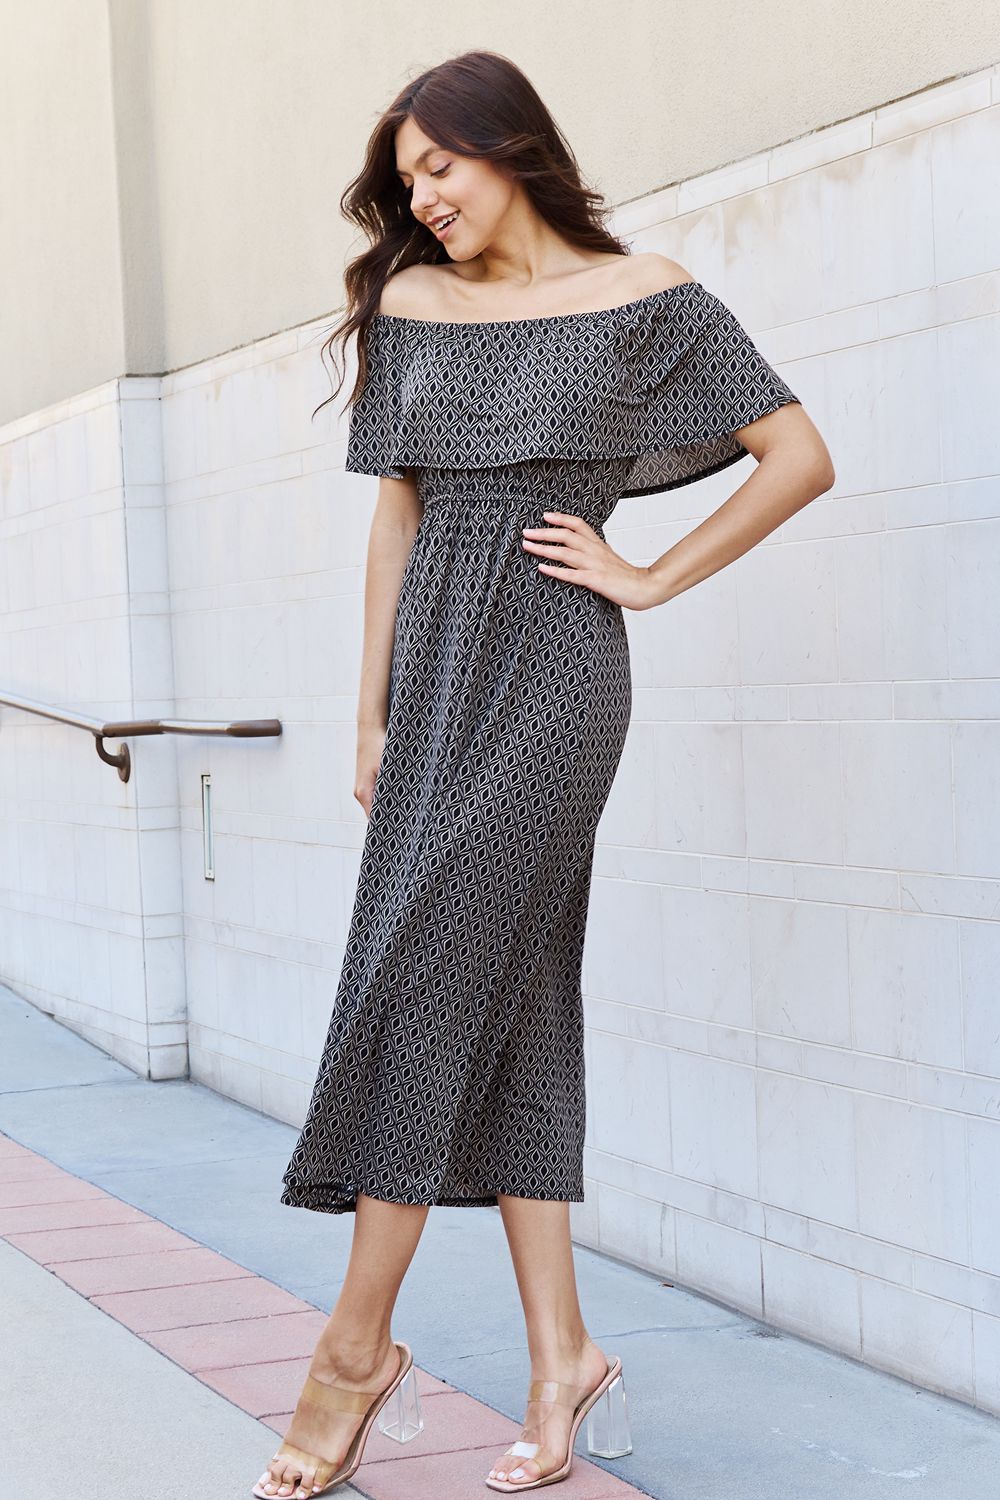 Uylee's Boutique My Best Angle Geometric Pattern Off The Shoulder Midi Dress in Black